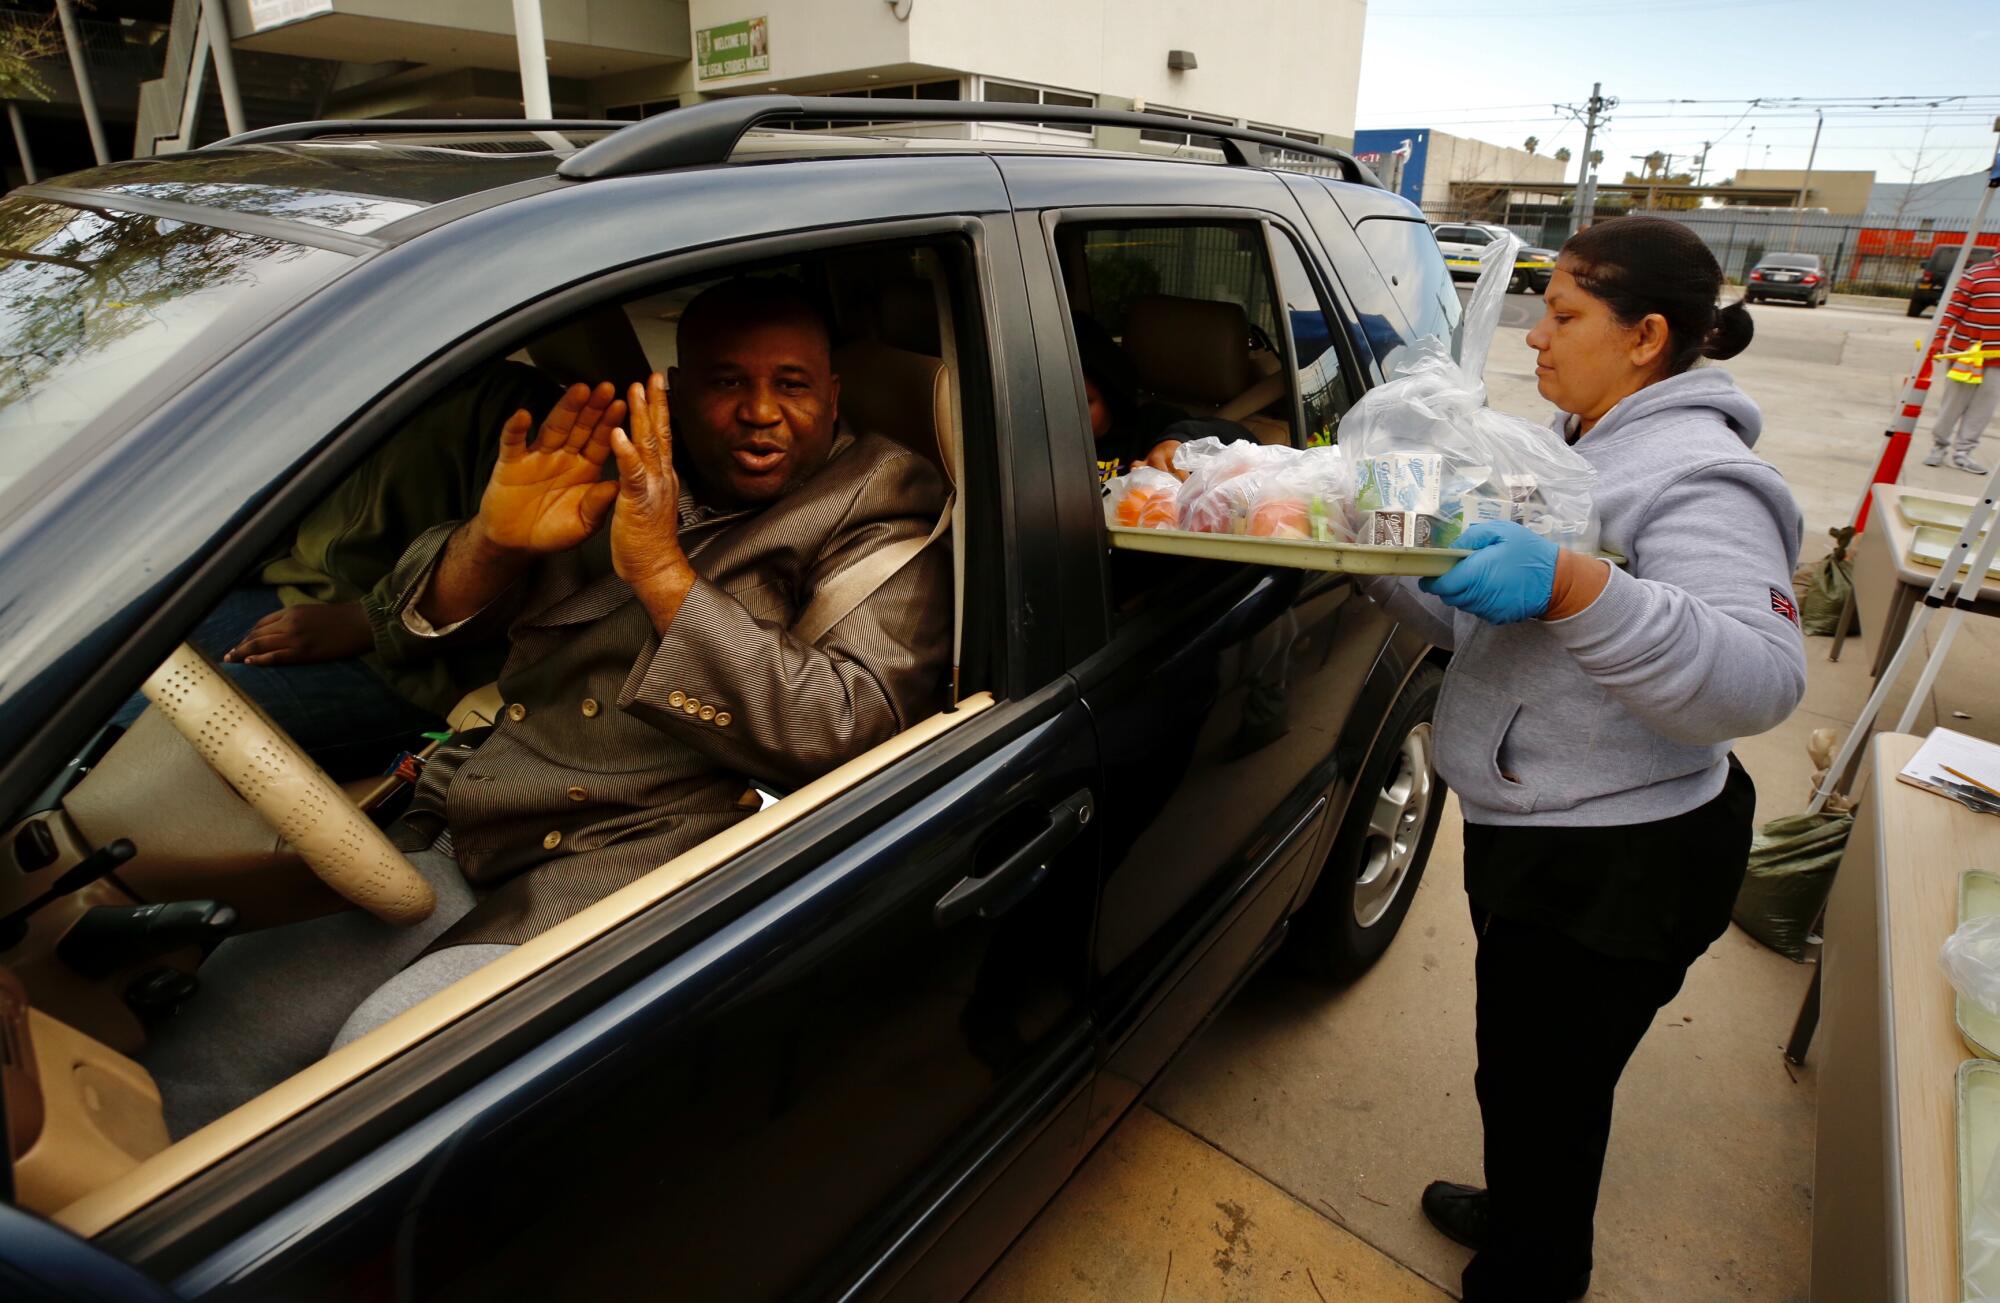 Alake Ilegbameh says "May God continue to bless you" over and over again as he picks up food for his children from an L.A. Unified worker at Dorsey High in South Los Angeles.